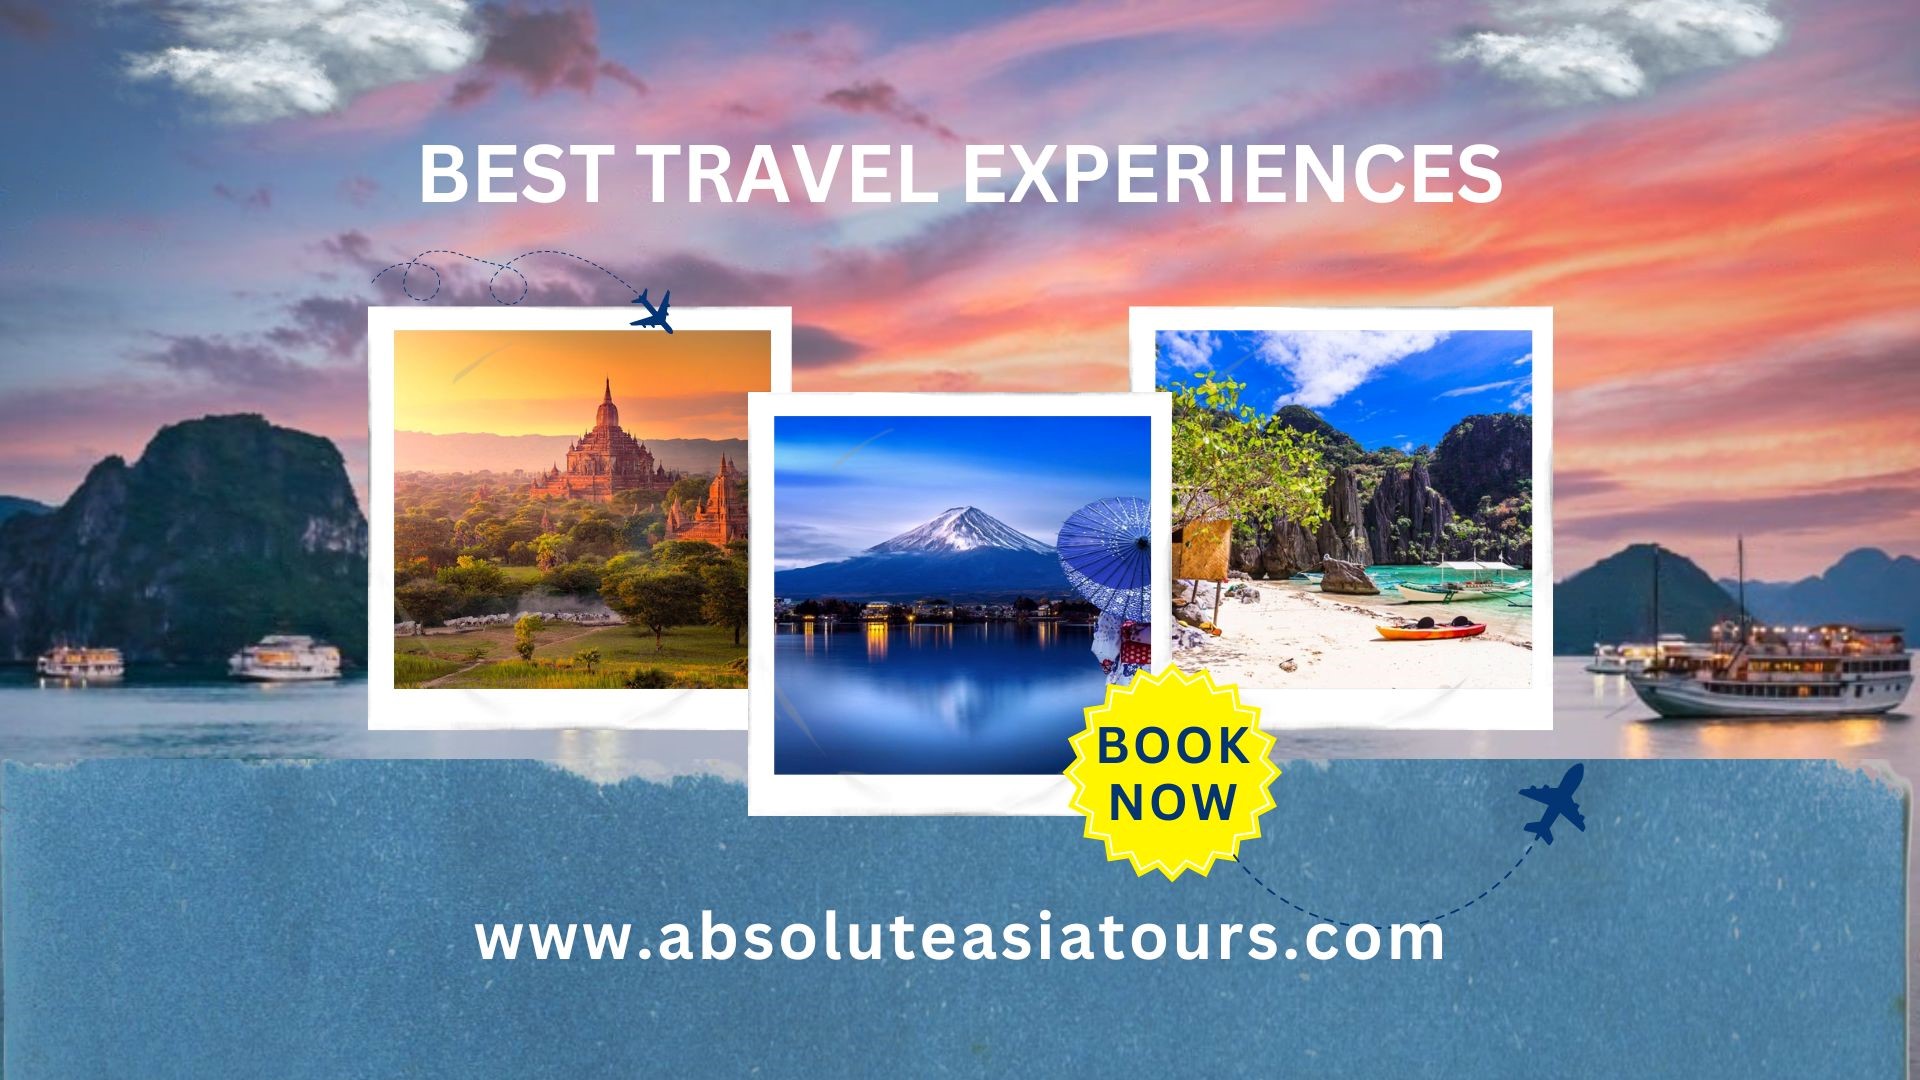 Incredible Travel Experiences to Book with Absolute Asia Tours